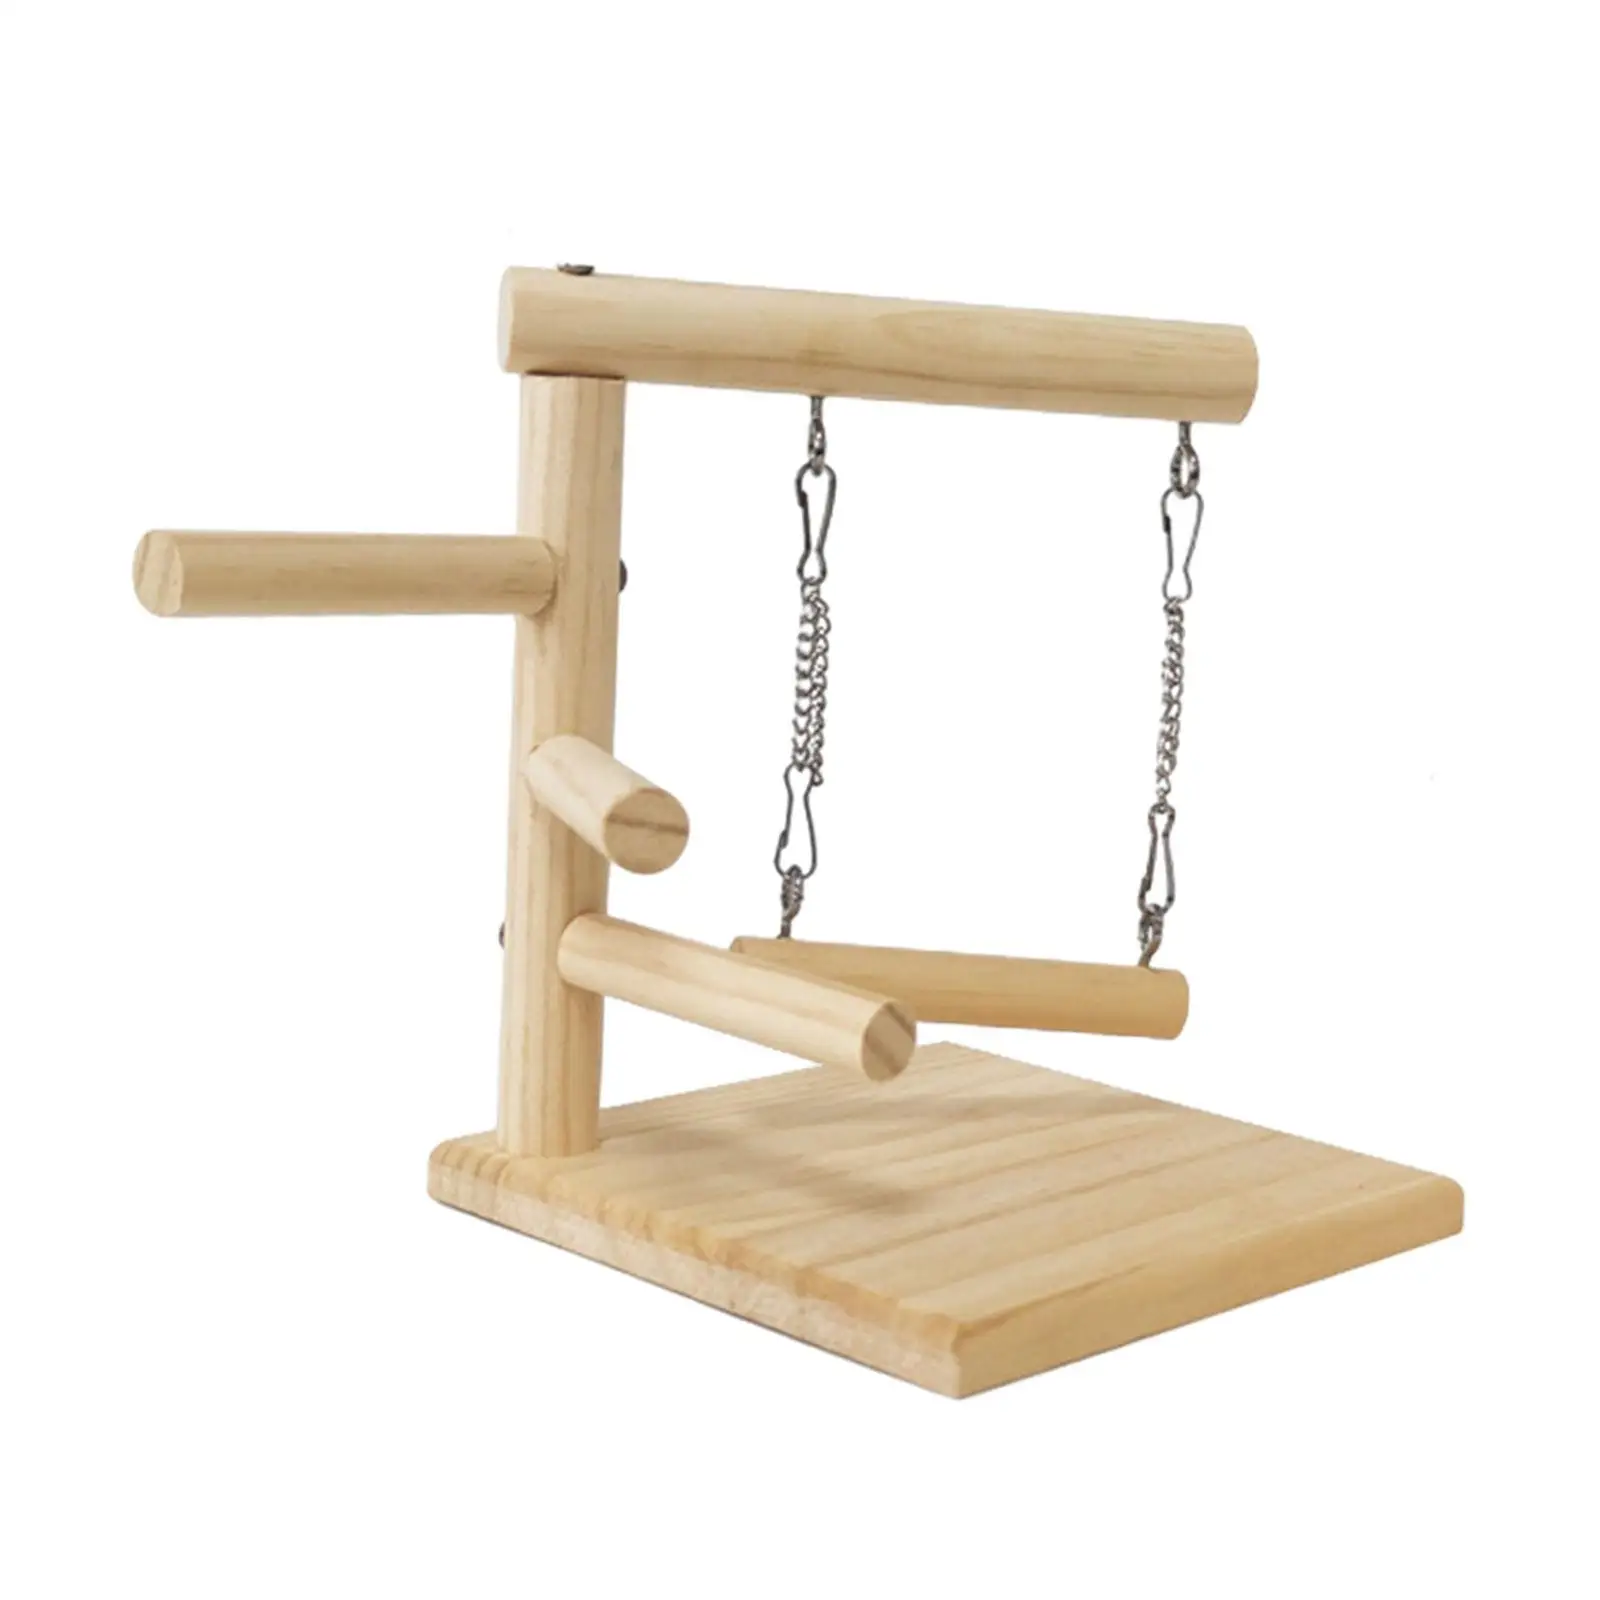 Wood Birds Cage Toys Gym Playground Bird Tabletop Training Perch Play Stand for Parrots Parakeets Cockatiels Canaries